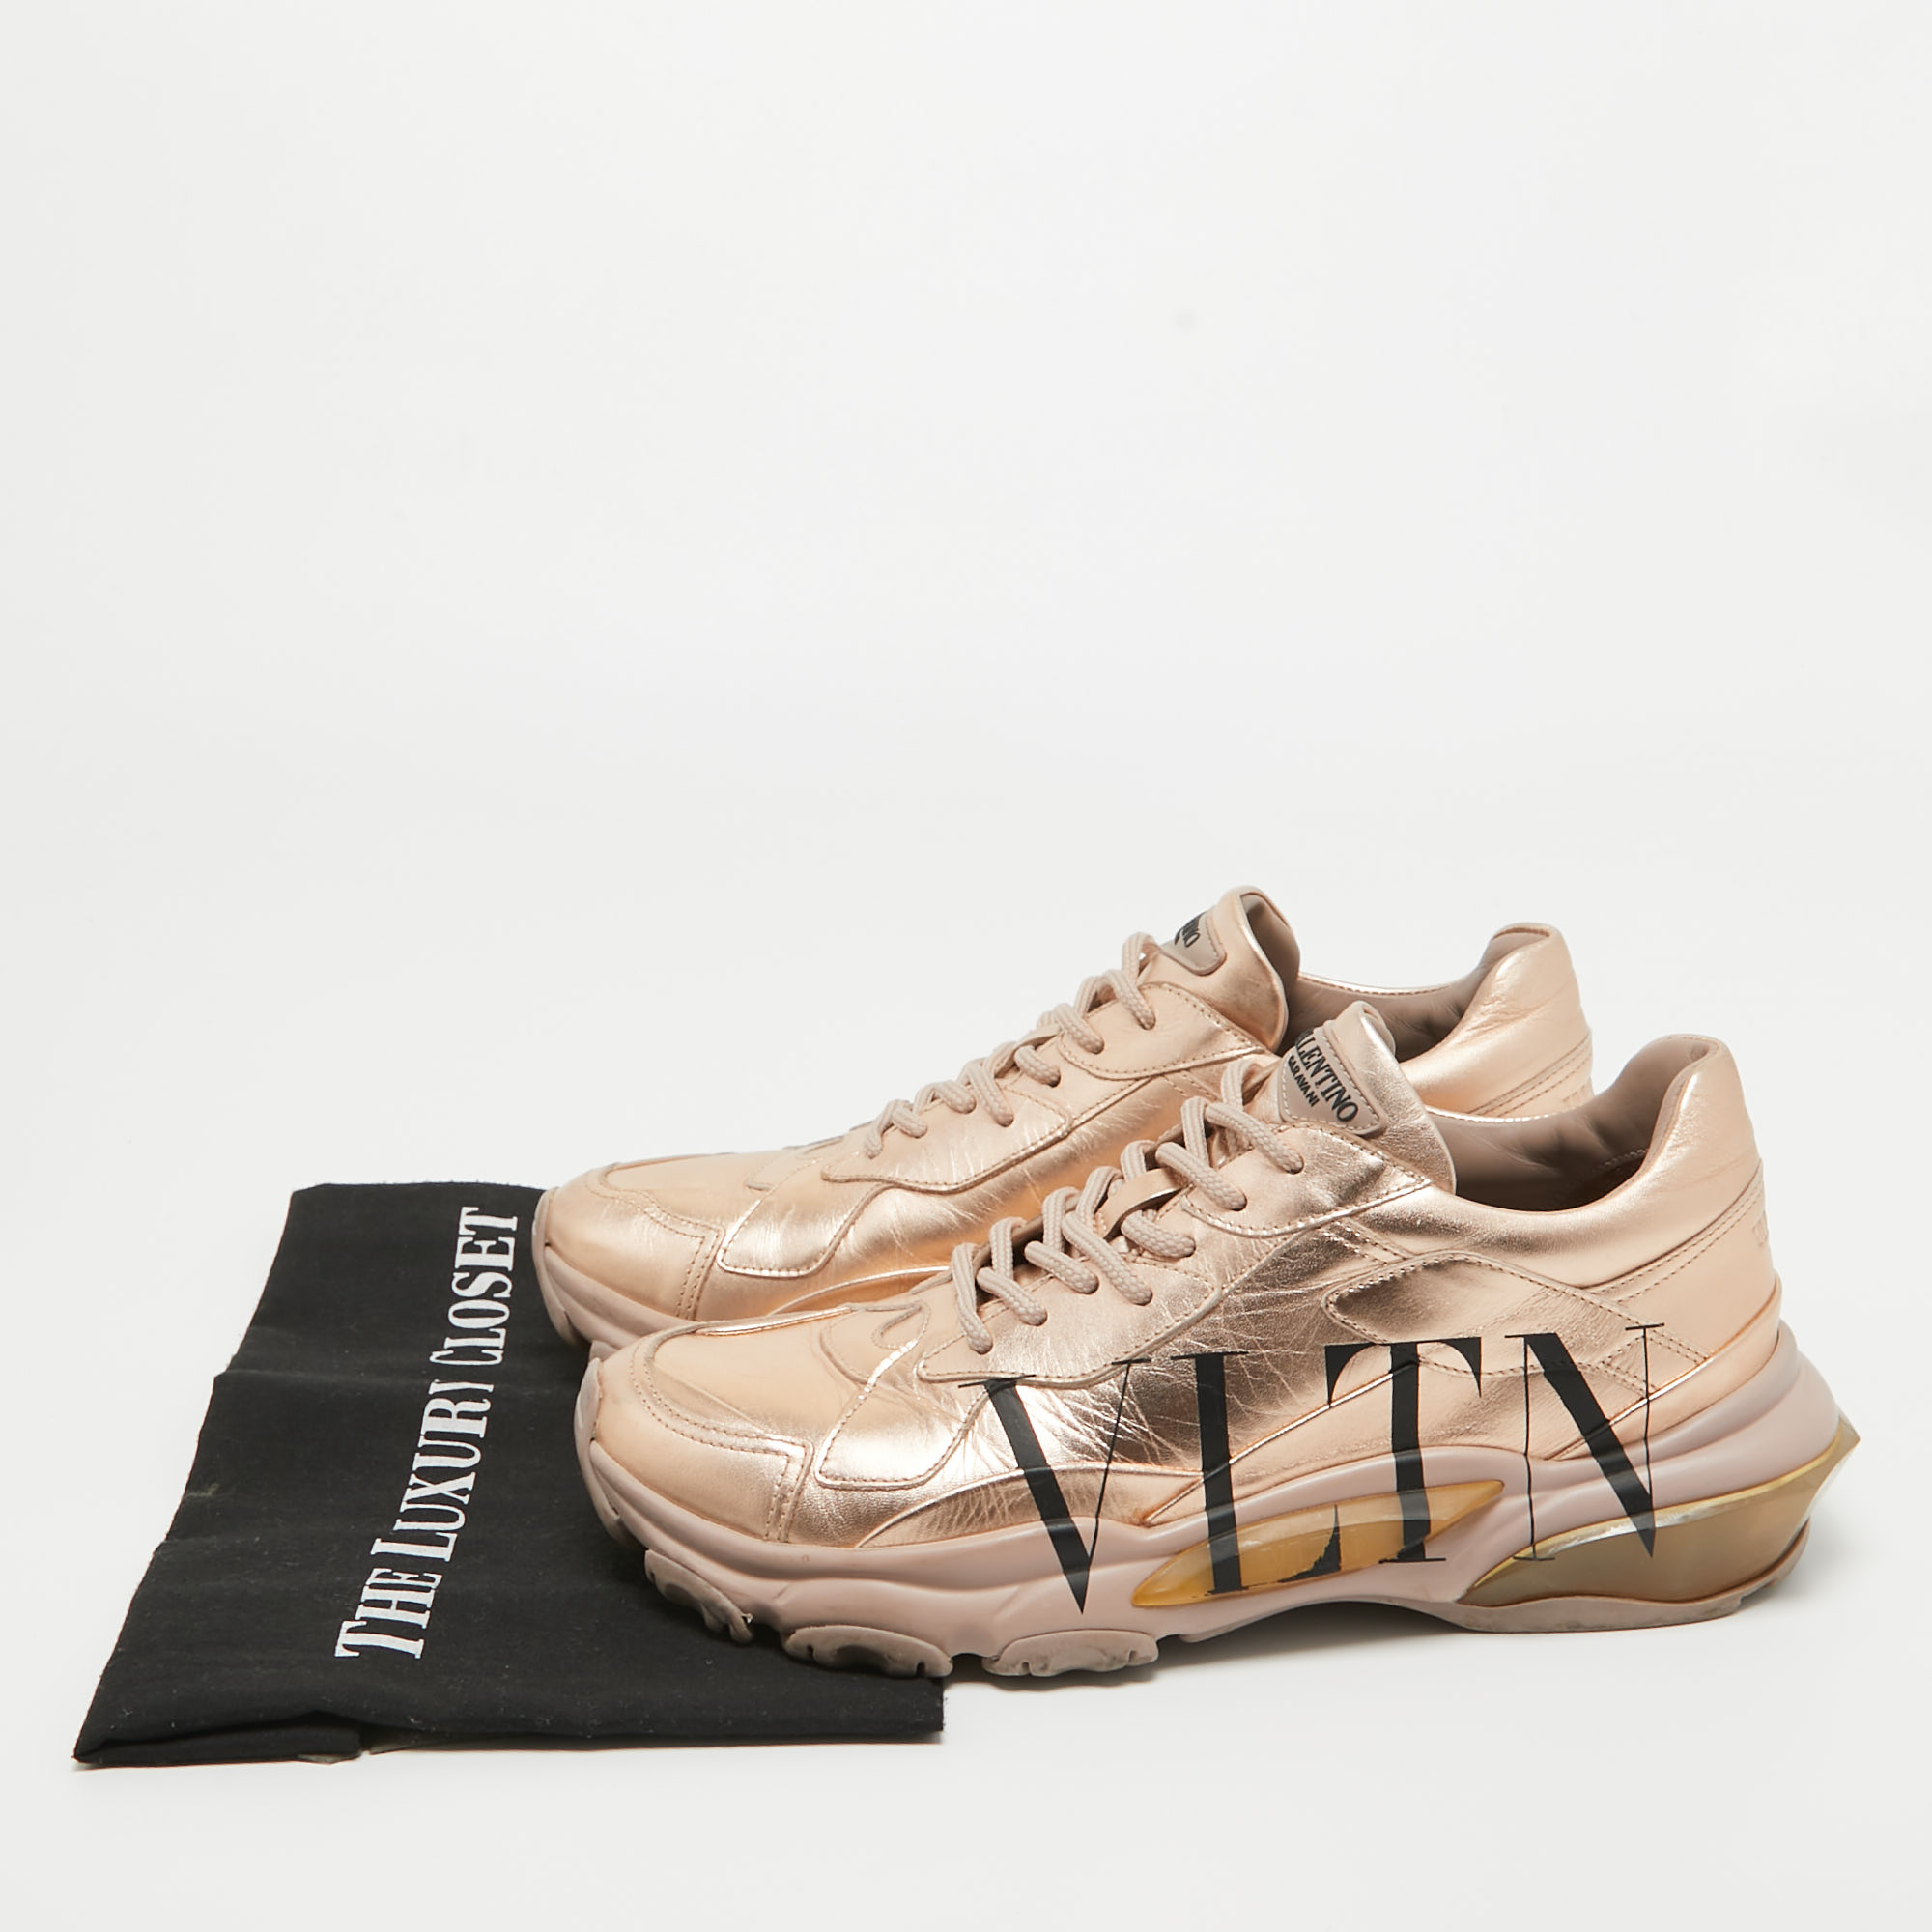 Valentino Rose Gold Leather VLTN Print Bounce Sneakers Size 40